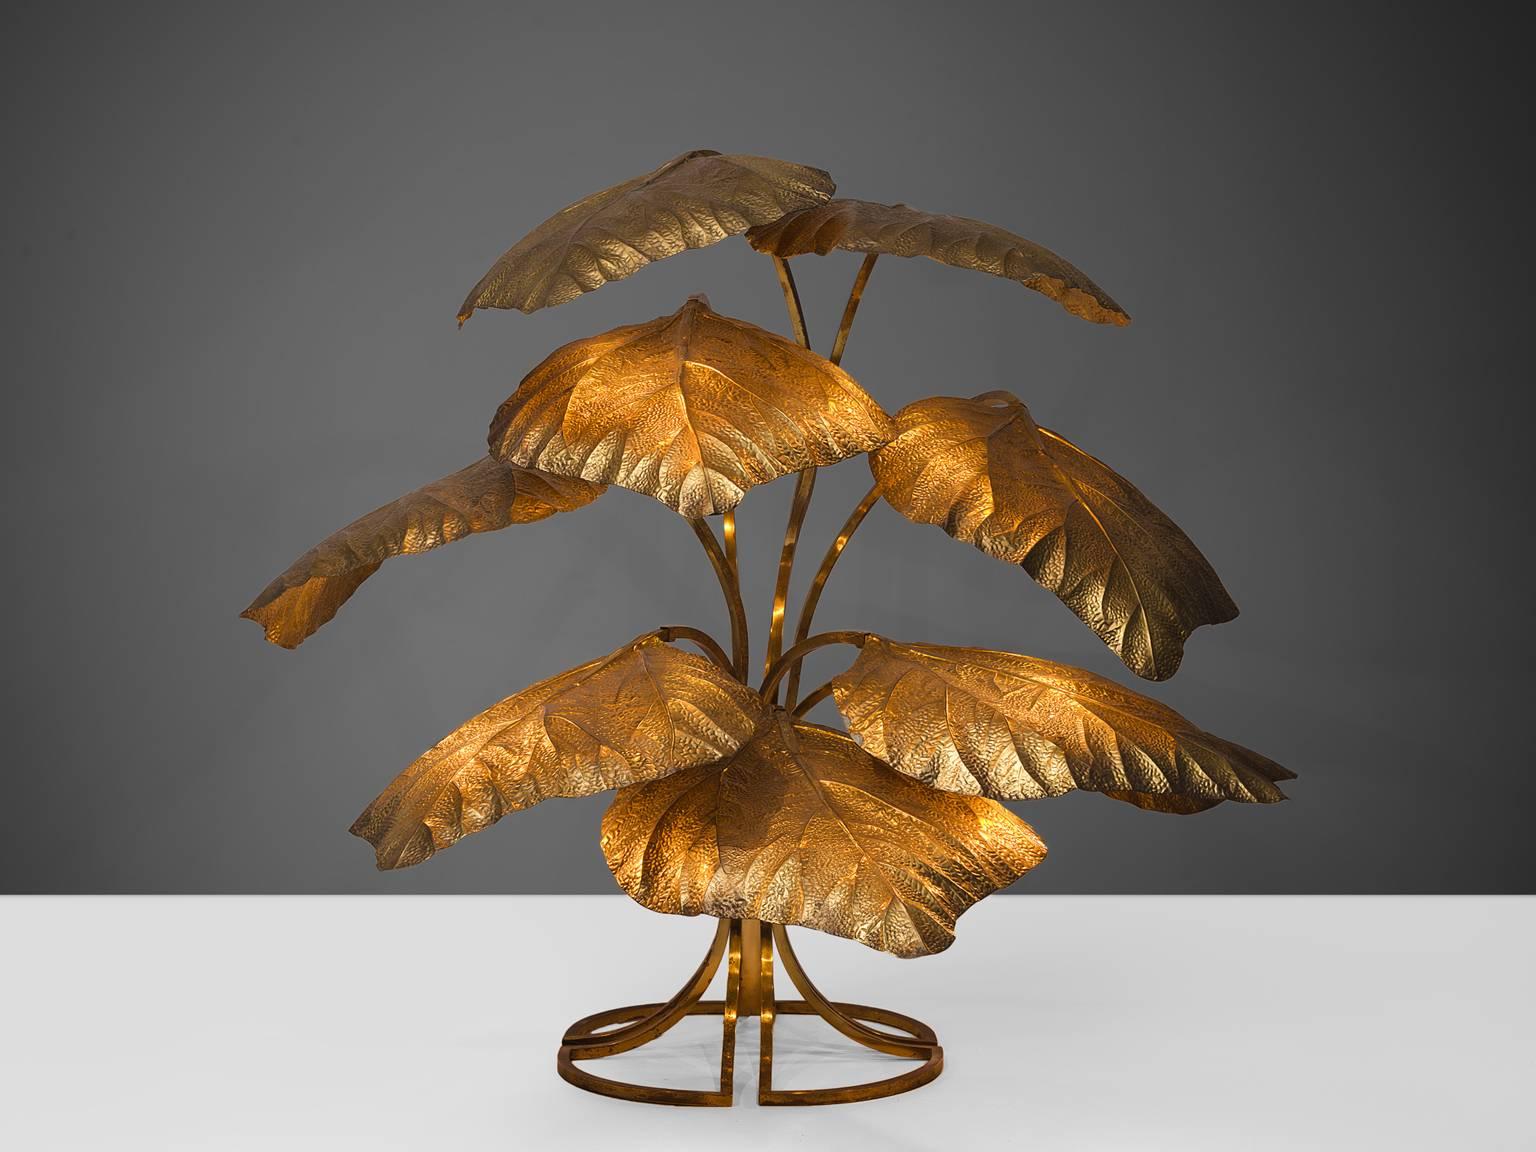 Carlo Giorgi for Bottega Gadda, brass 'rhubarb' leaf lamp, Italy, 1970s

This large leafy floor lamp is designed by Carlo Giorgi and produced in Italy in the 1970s. This biomorphic, hand-hammered brass floor lamp resembles large rhubarb leaves.